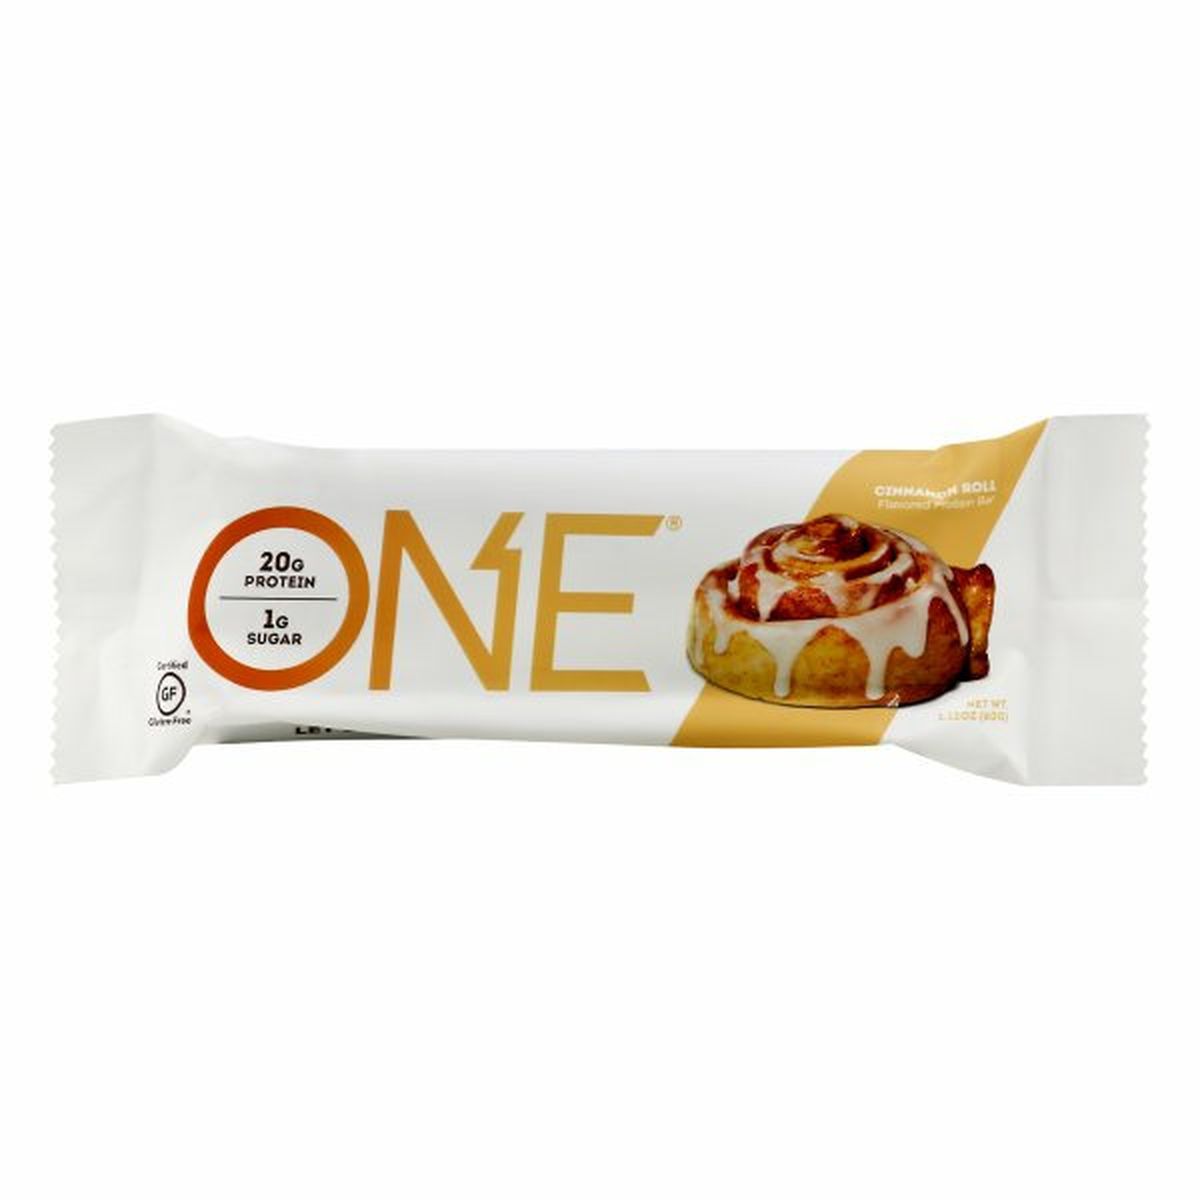 Calories in One Flavored Protein Bar, Cinnamon Roll